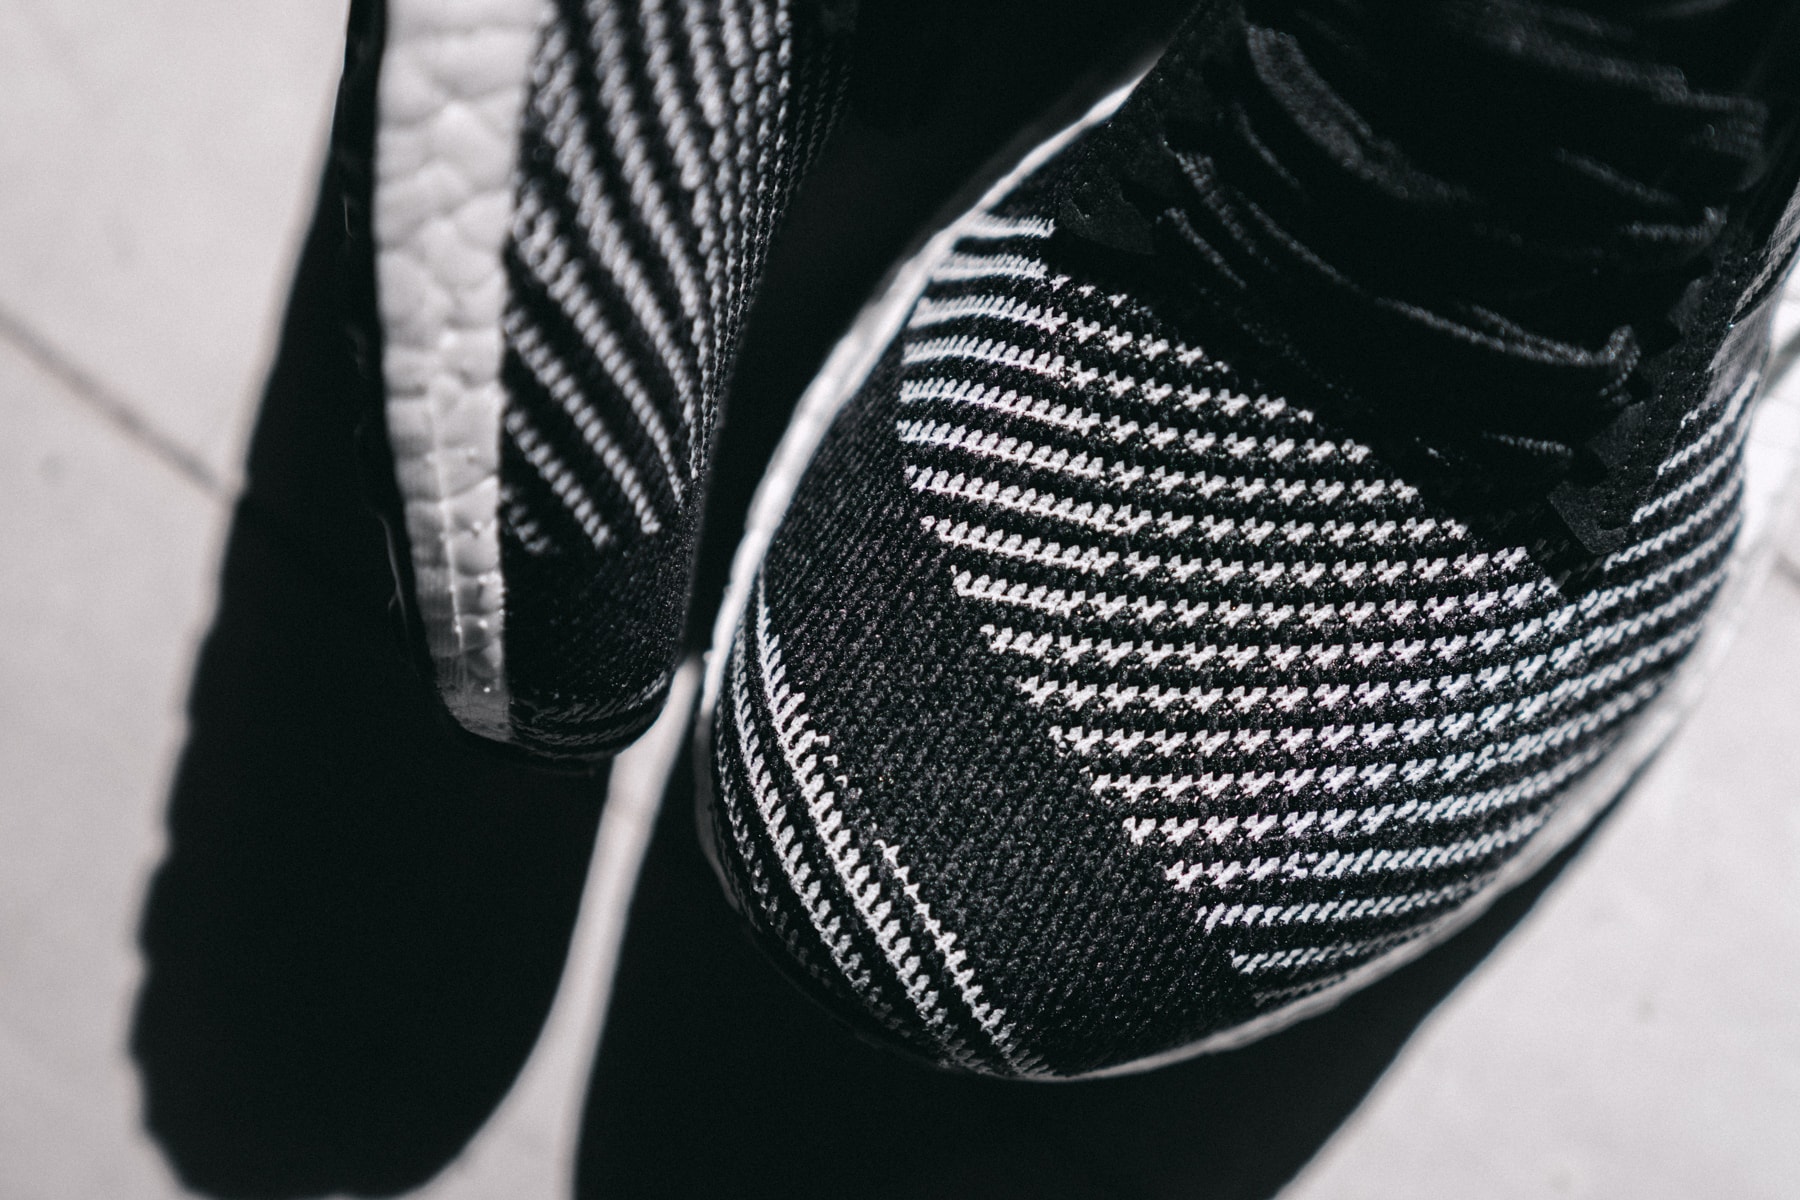 adidas ultraboost x cookies and cream national oreo day running sneaker black white closer look